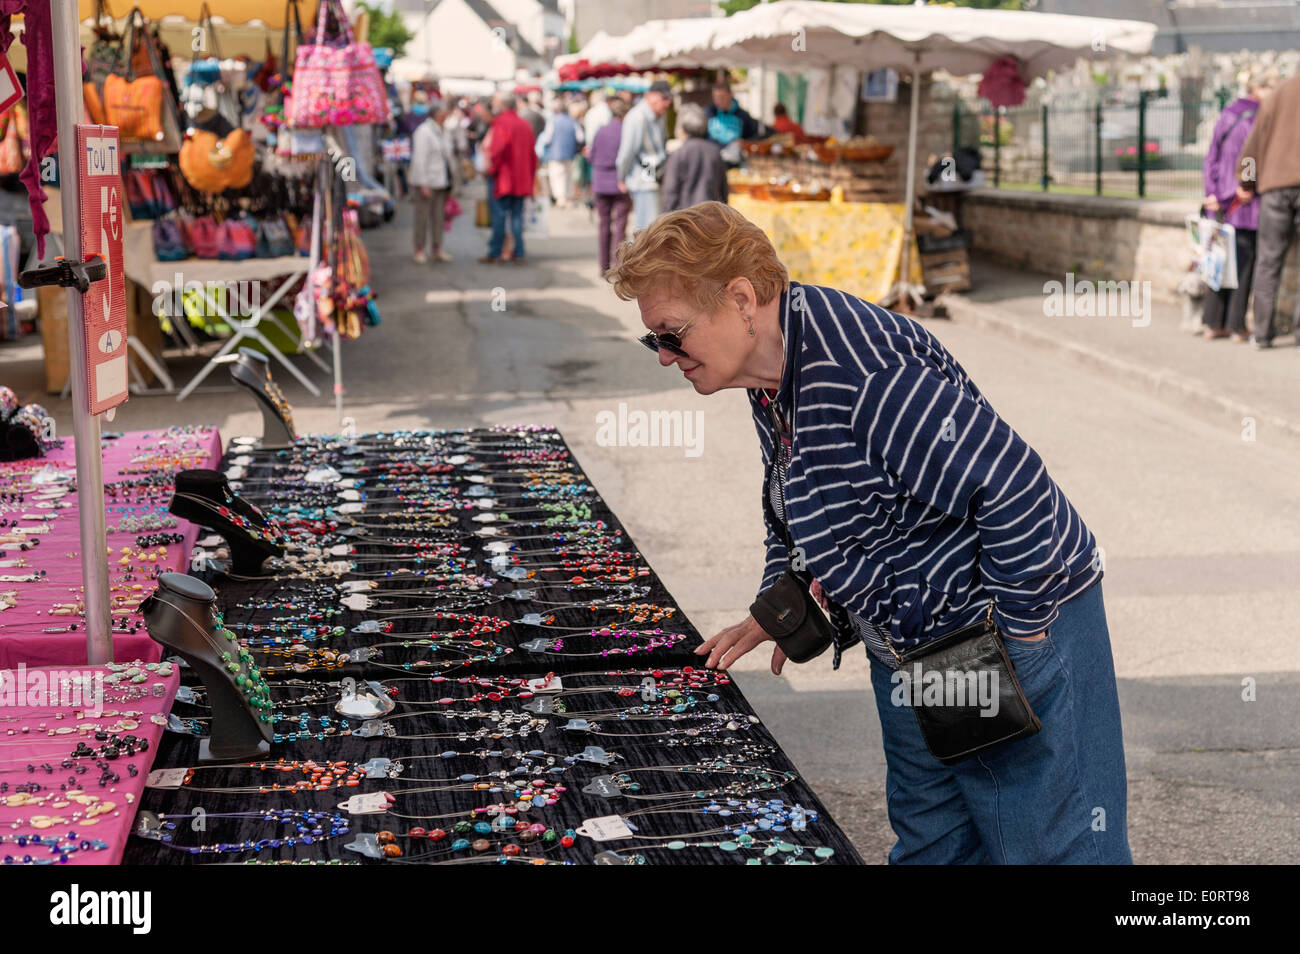 Senior woman shopping at a market stall, Bretagne, France, Europe Banque D'Images